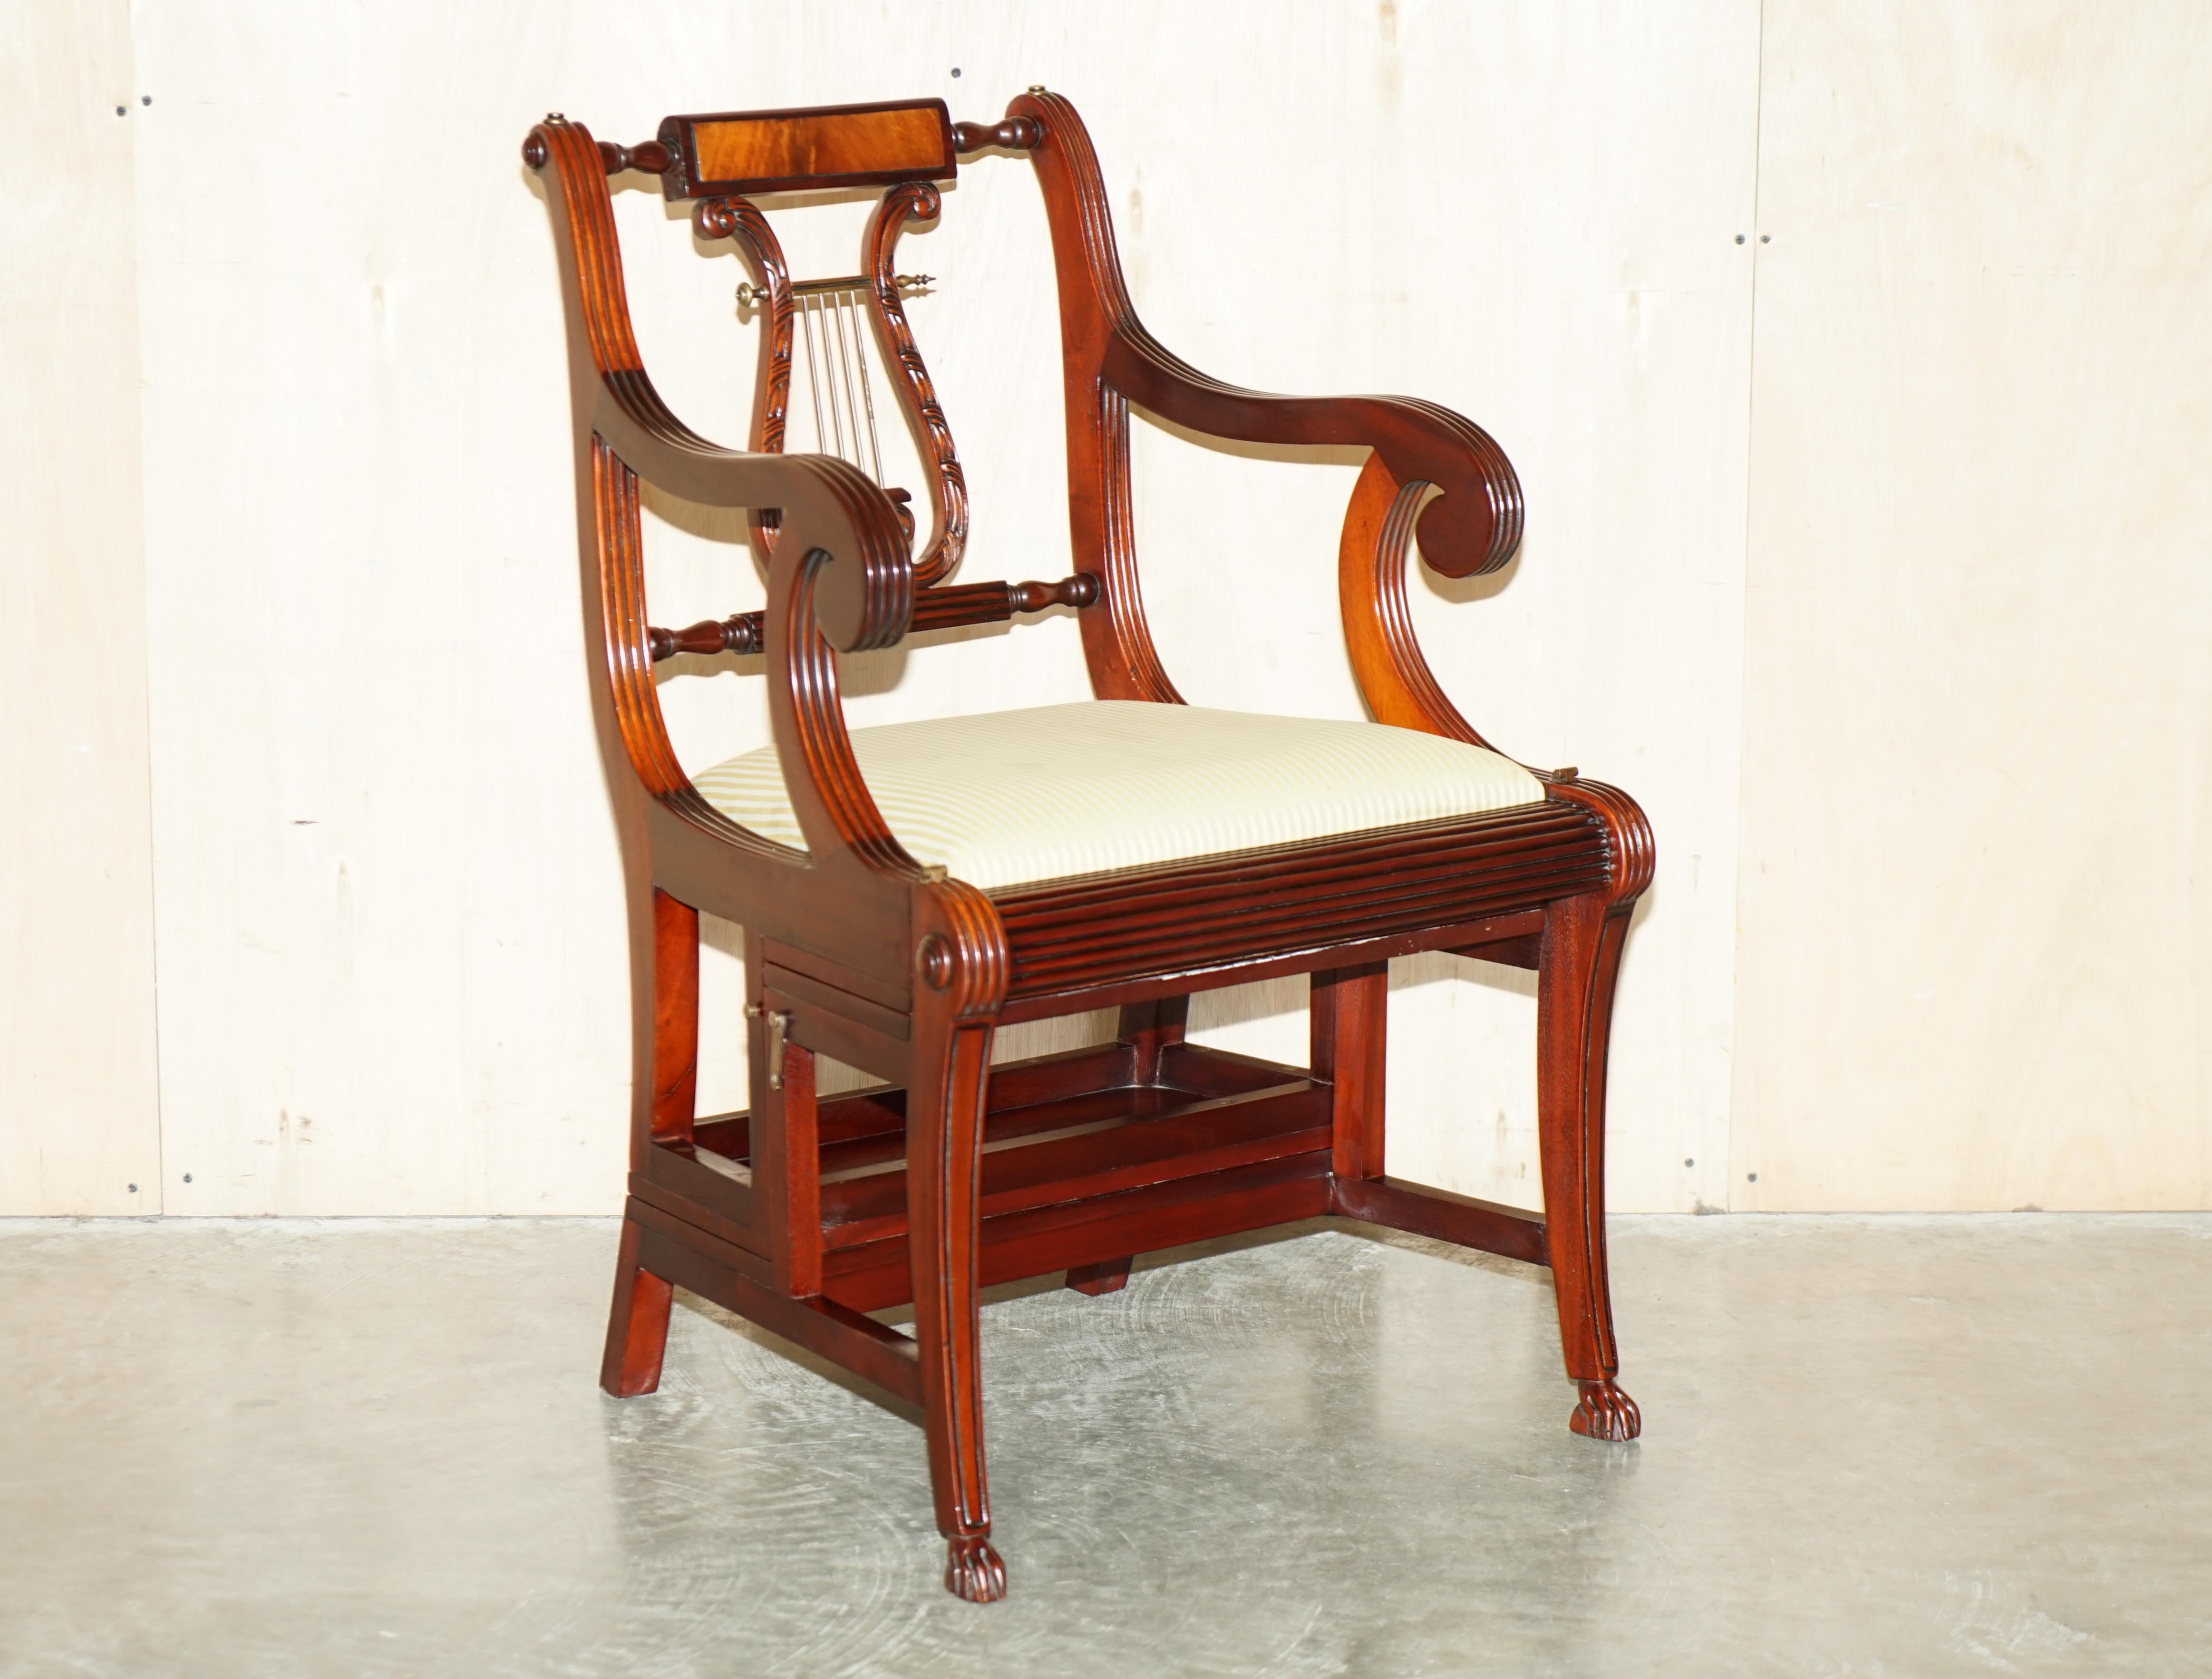 We are delighted to offer for sale this large and collectable vintage metamorphic armchair which converts into Library steps with leather upholstered steps

A good looking well made and decorative library armchair which metamorphosizes into a